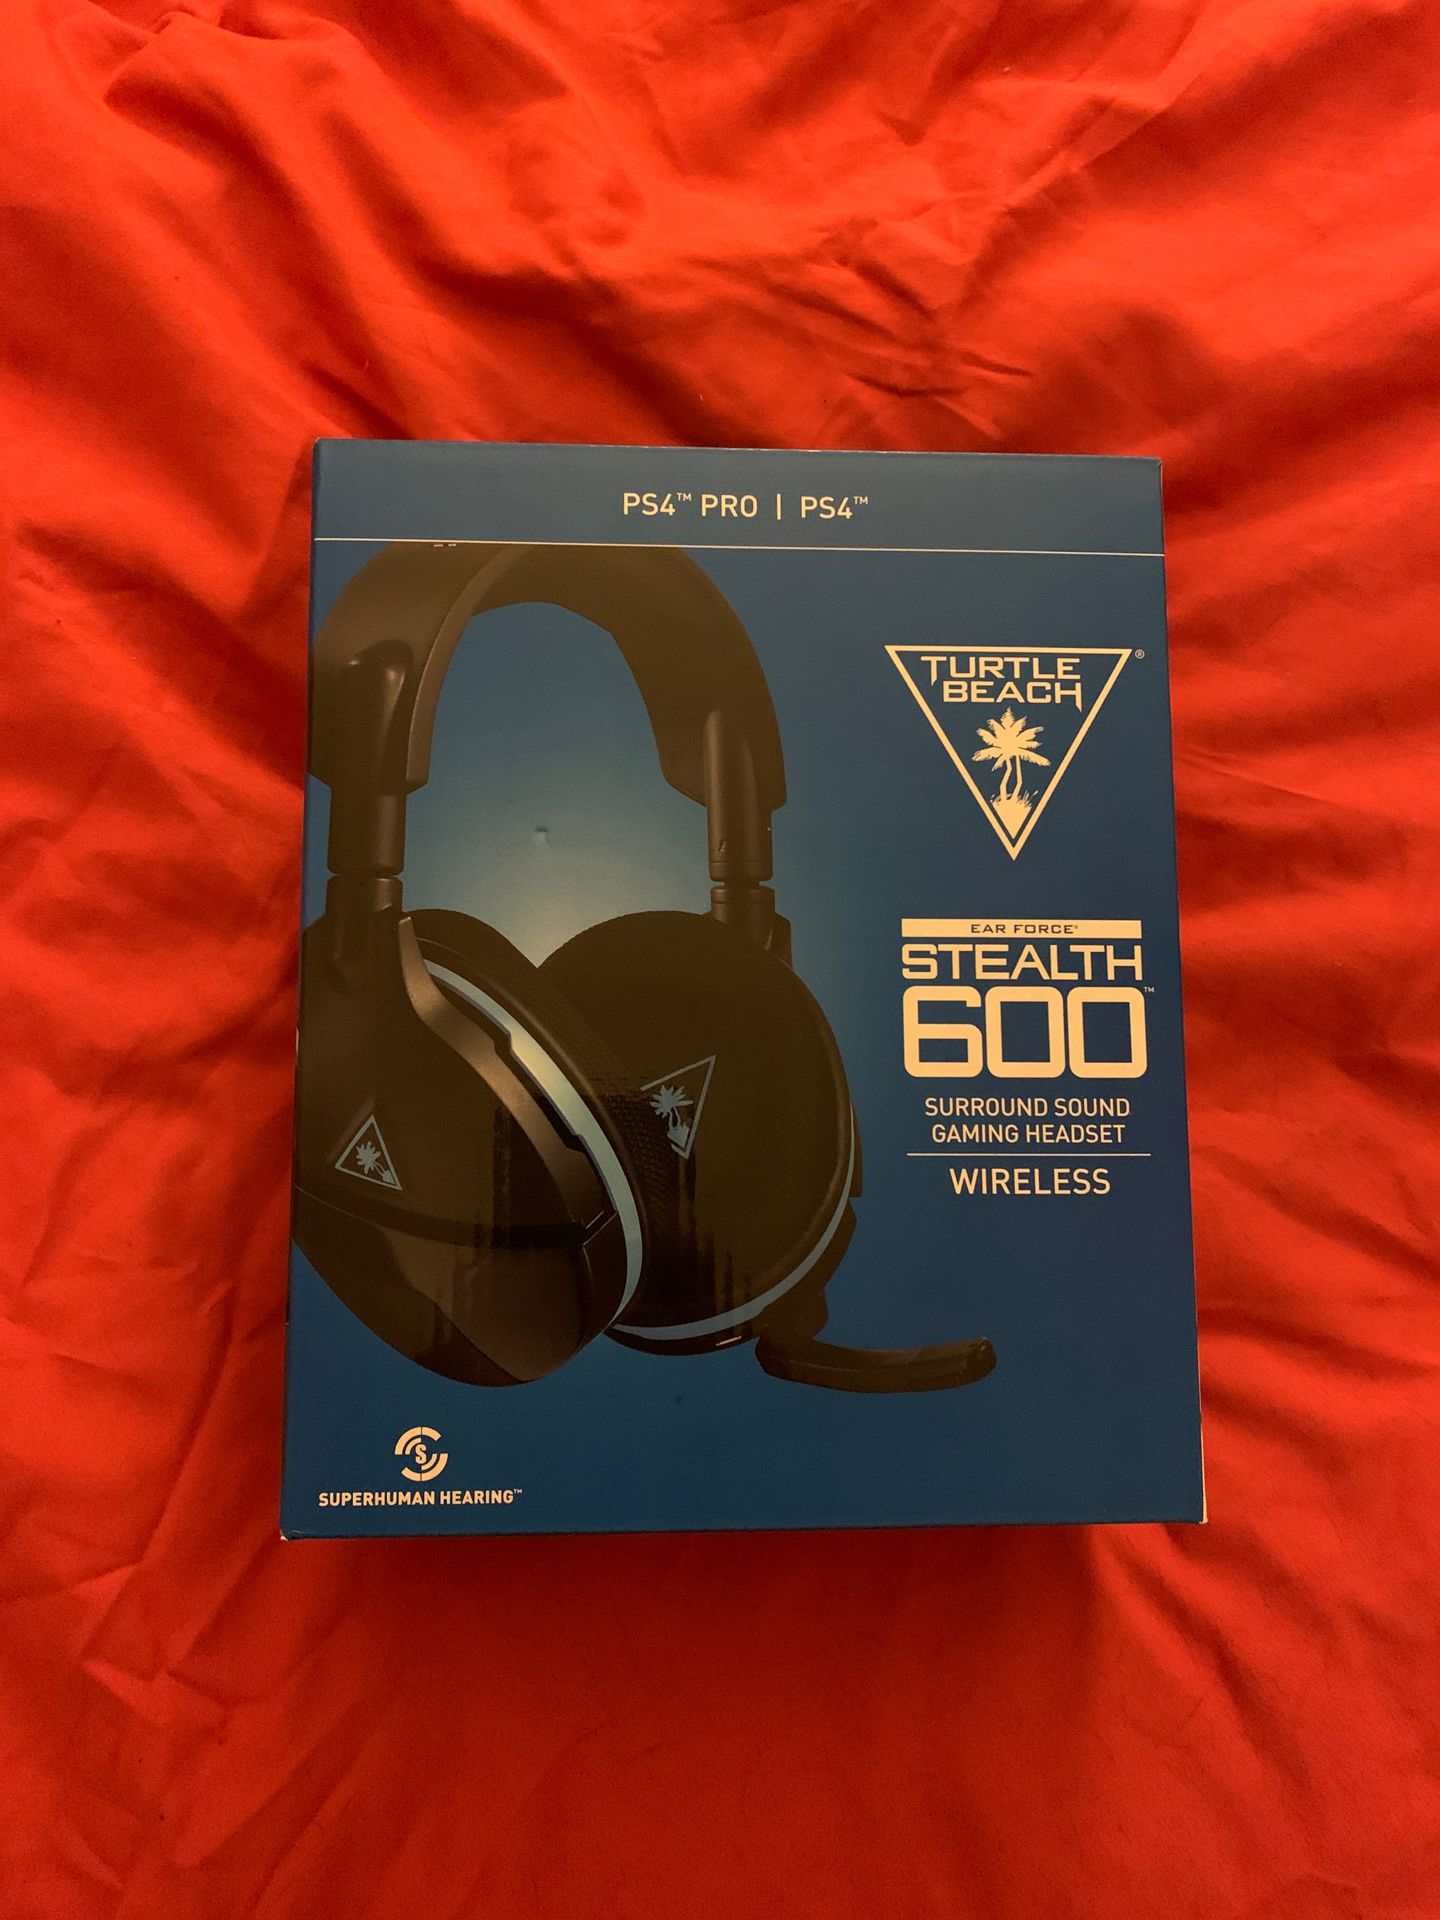 Turtle beach stealth 600 wireless PS4 gaming headset